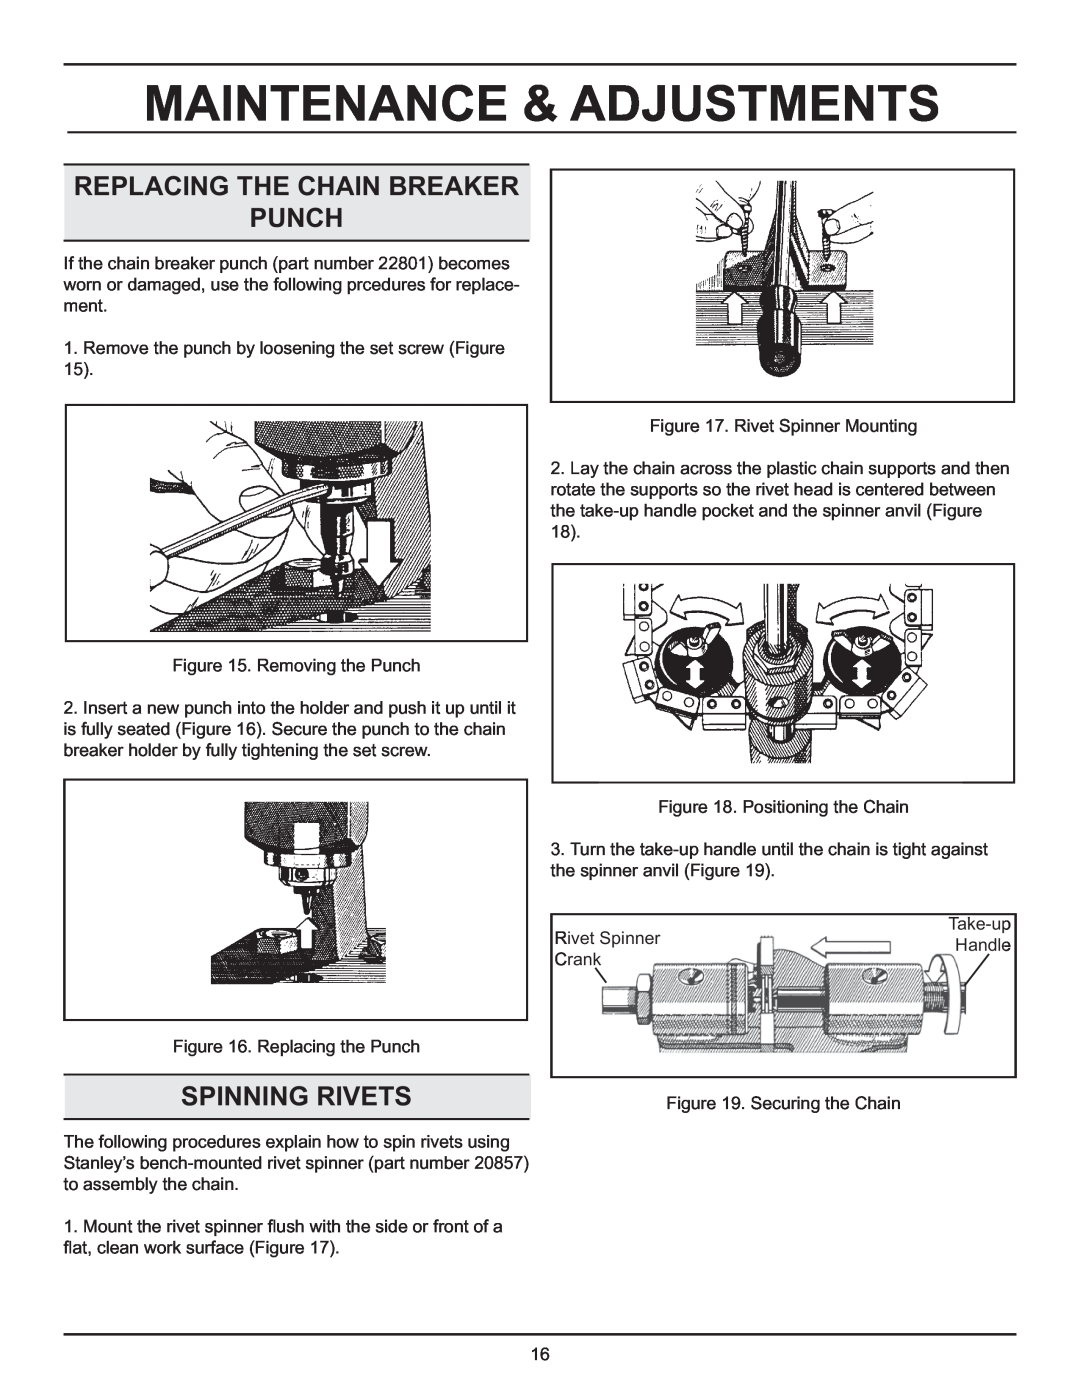 Stanley Black & Decker DS06 manual Replacing The Chain Breaker Punch, Spinning Rivets, Maintenance & Adjustments 